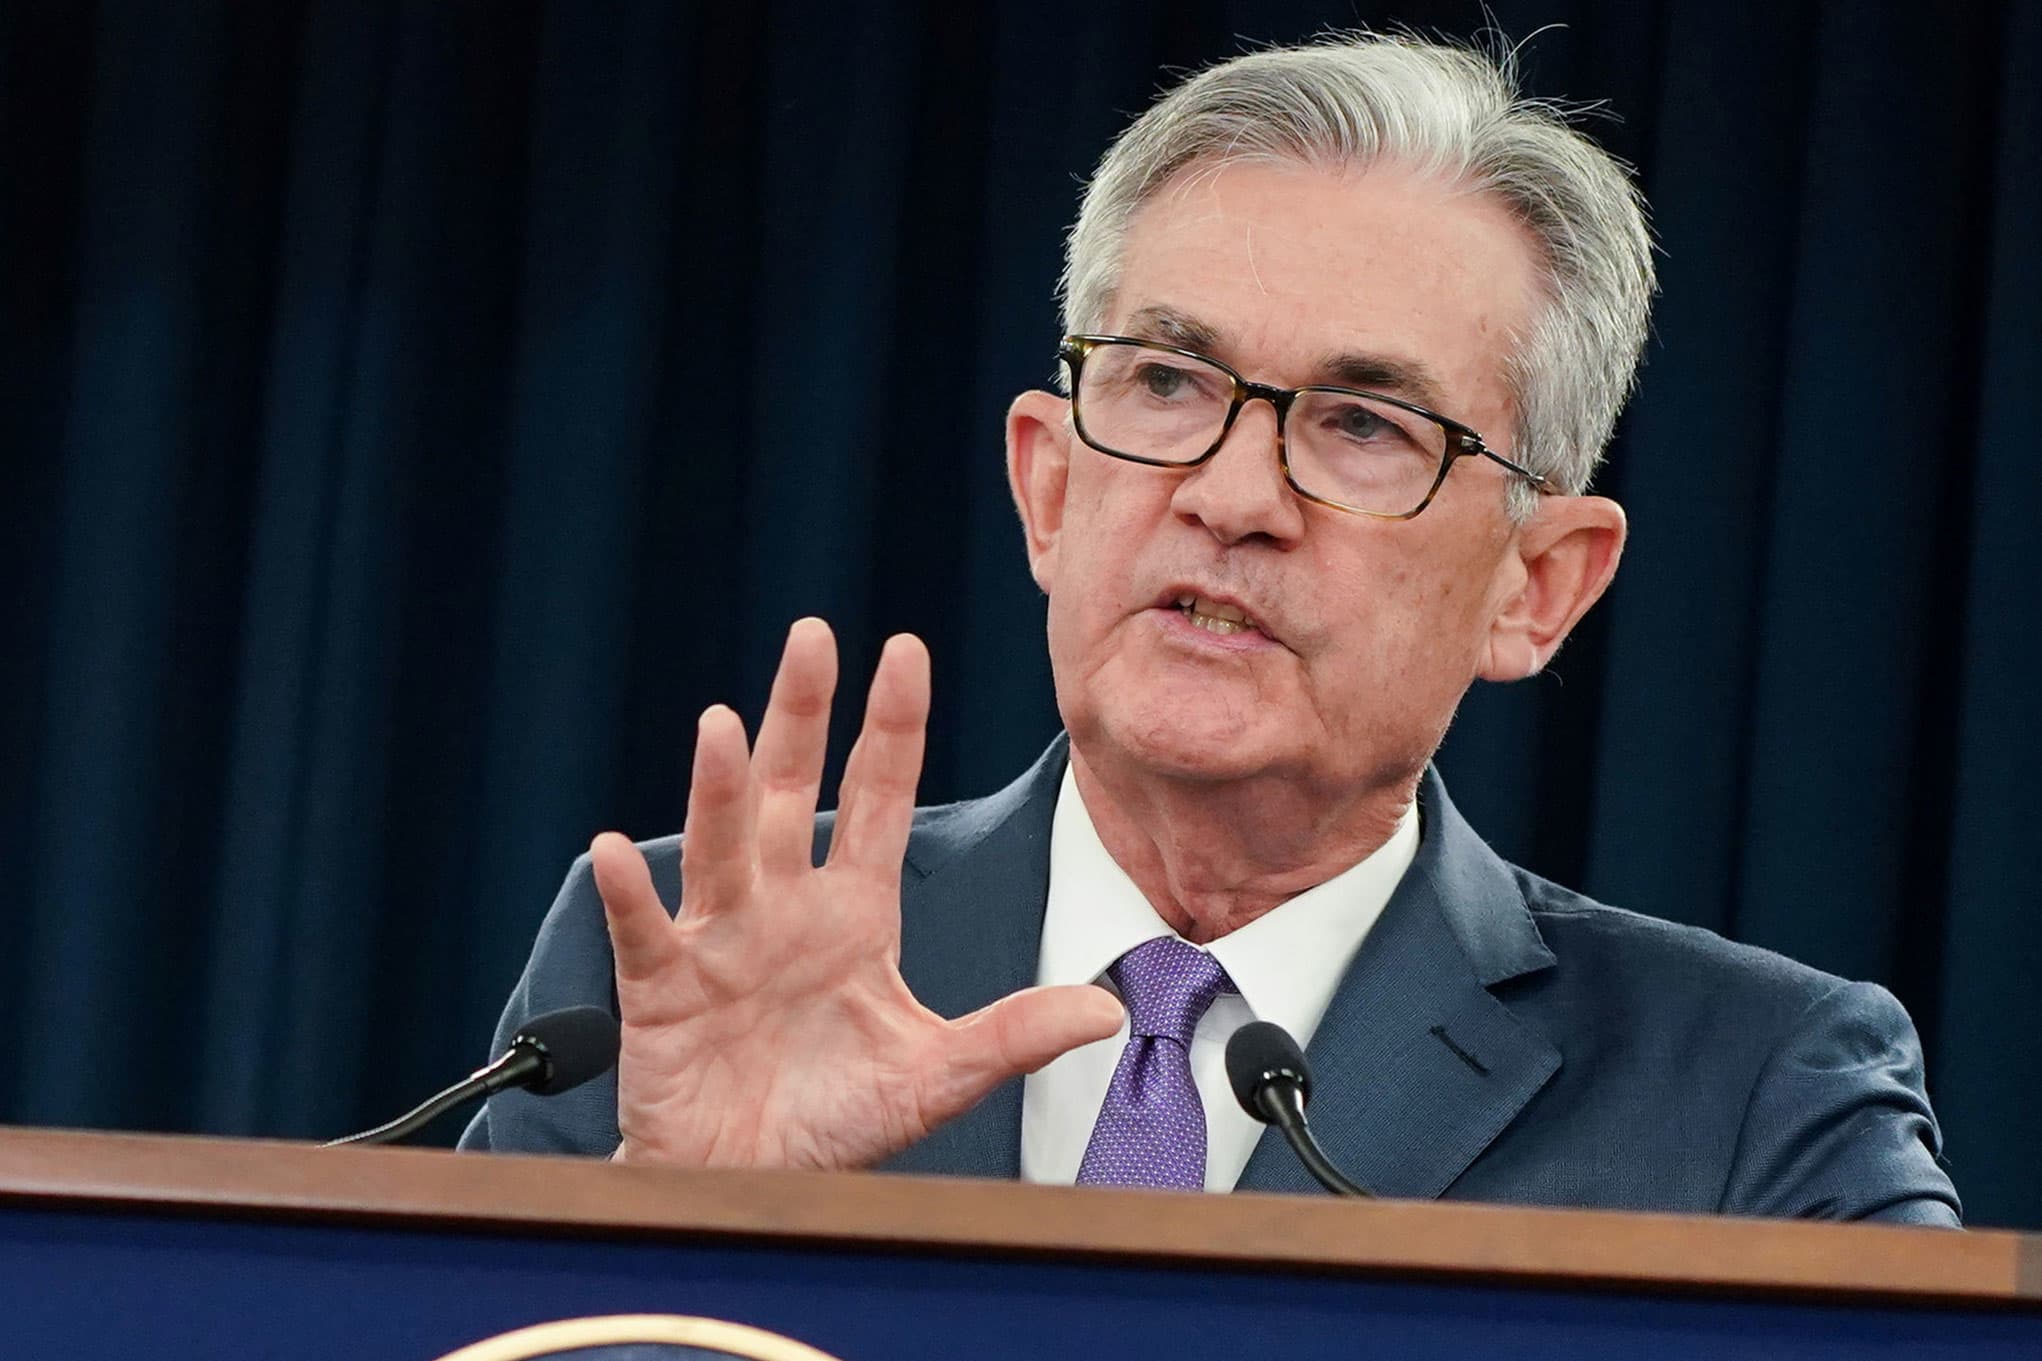 Cryptocurrencies are not useful deposits of value, says the Powell Fed